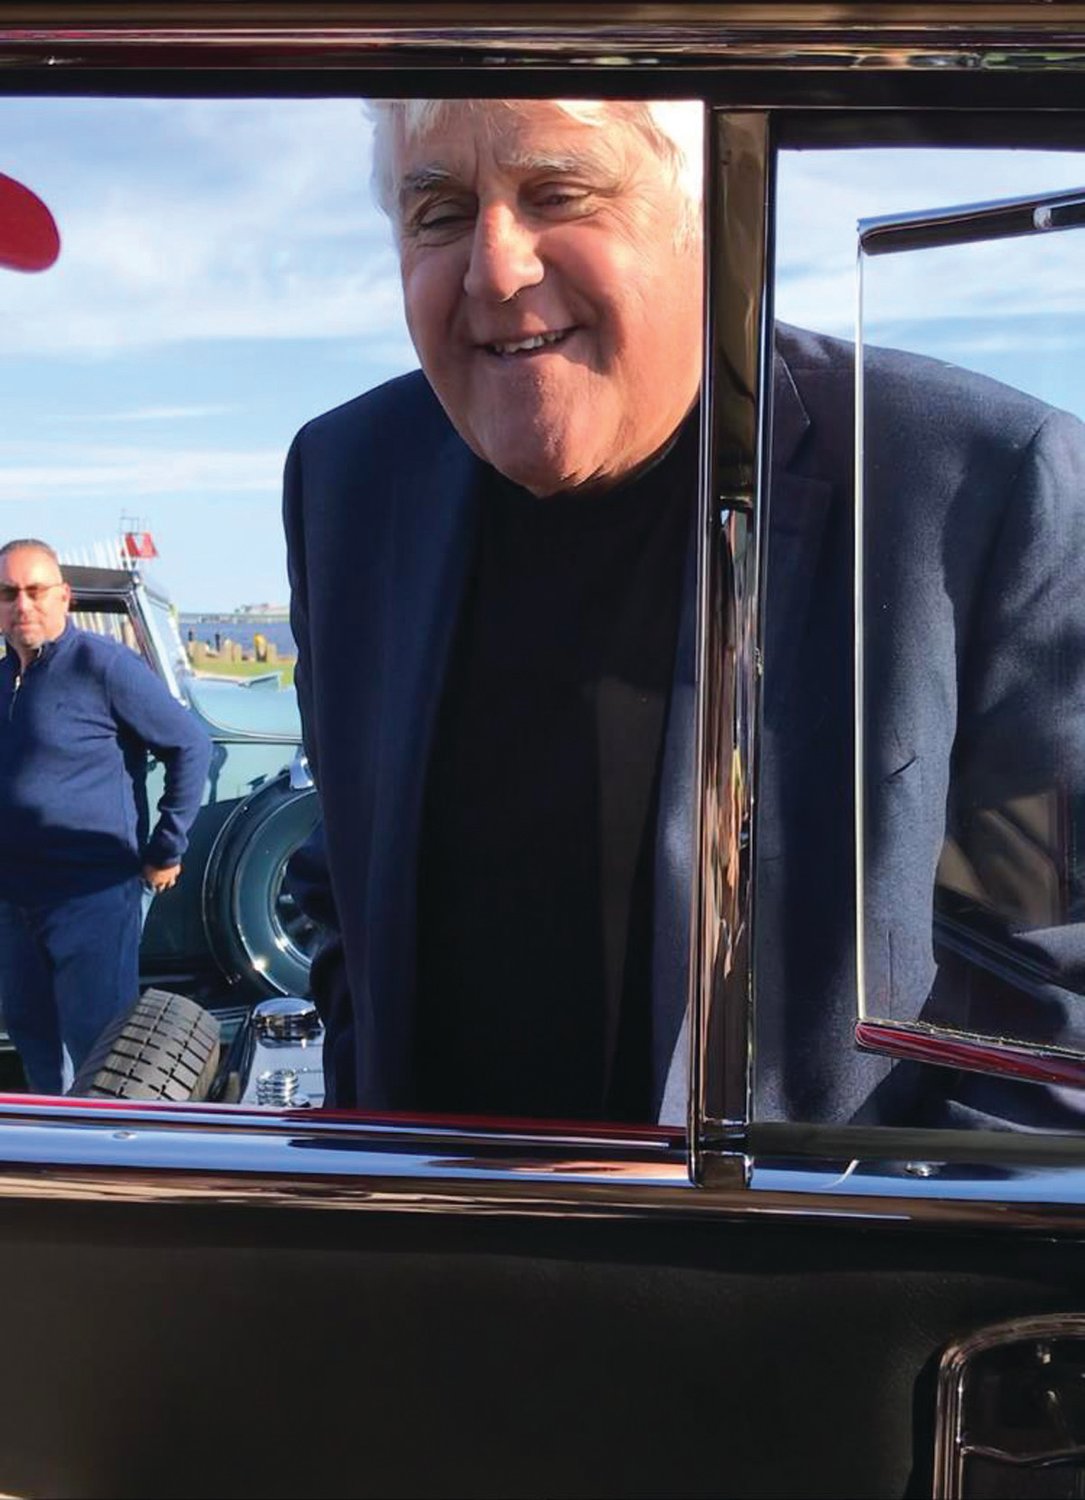 WHAT'S NEW, WHAT'S HAPPENING? Jay Leno poked his head through the window of John Ricci’s 1934 Cadillac during this year’s Concours d’Elegance in Newport.